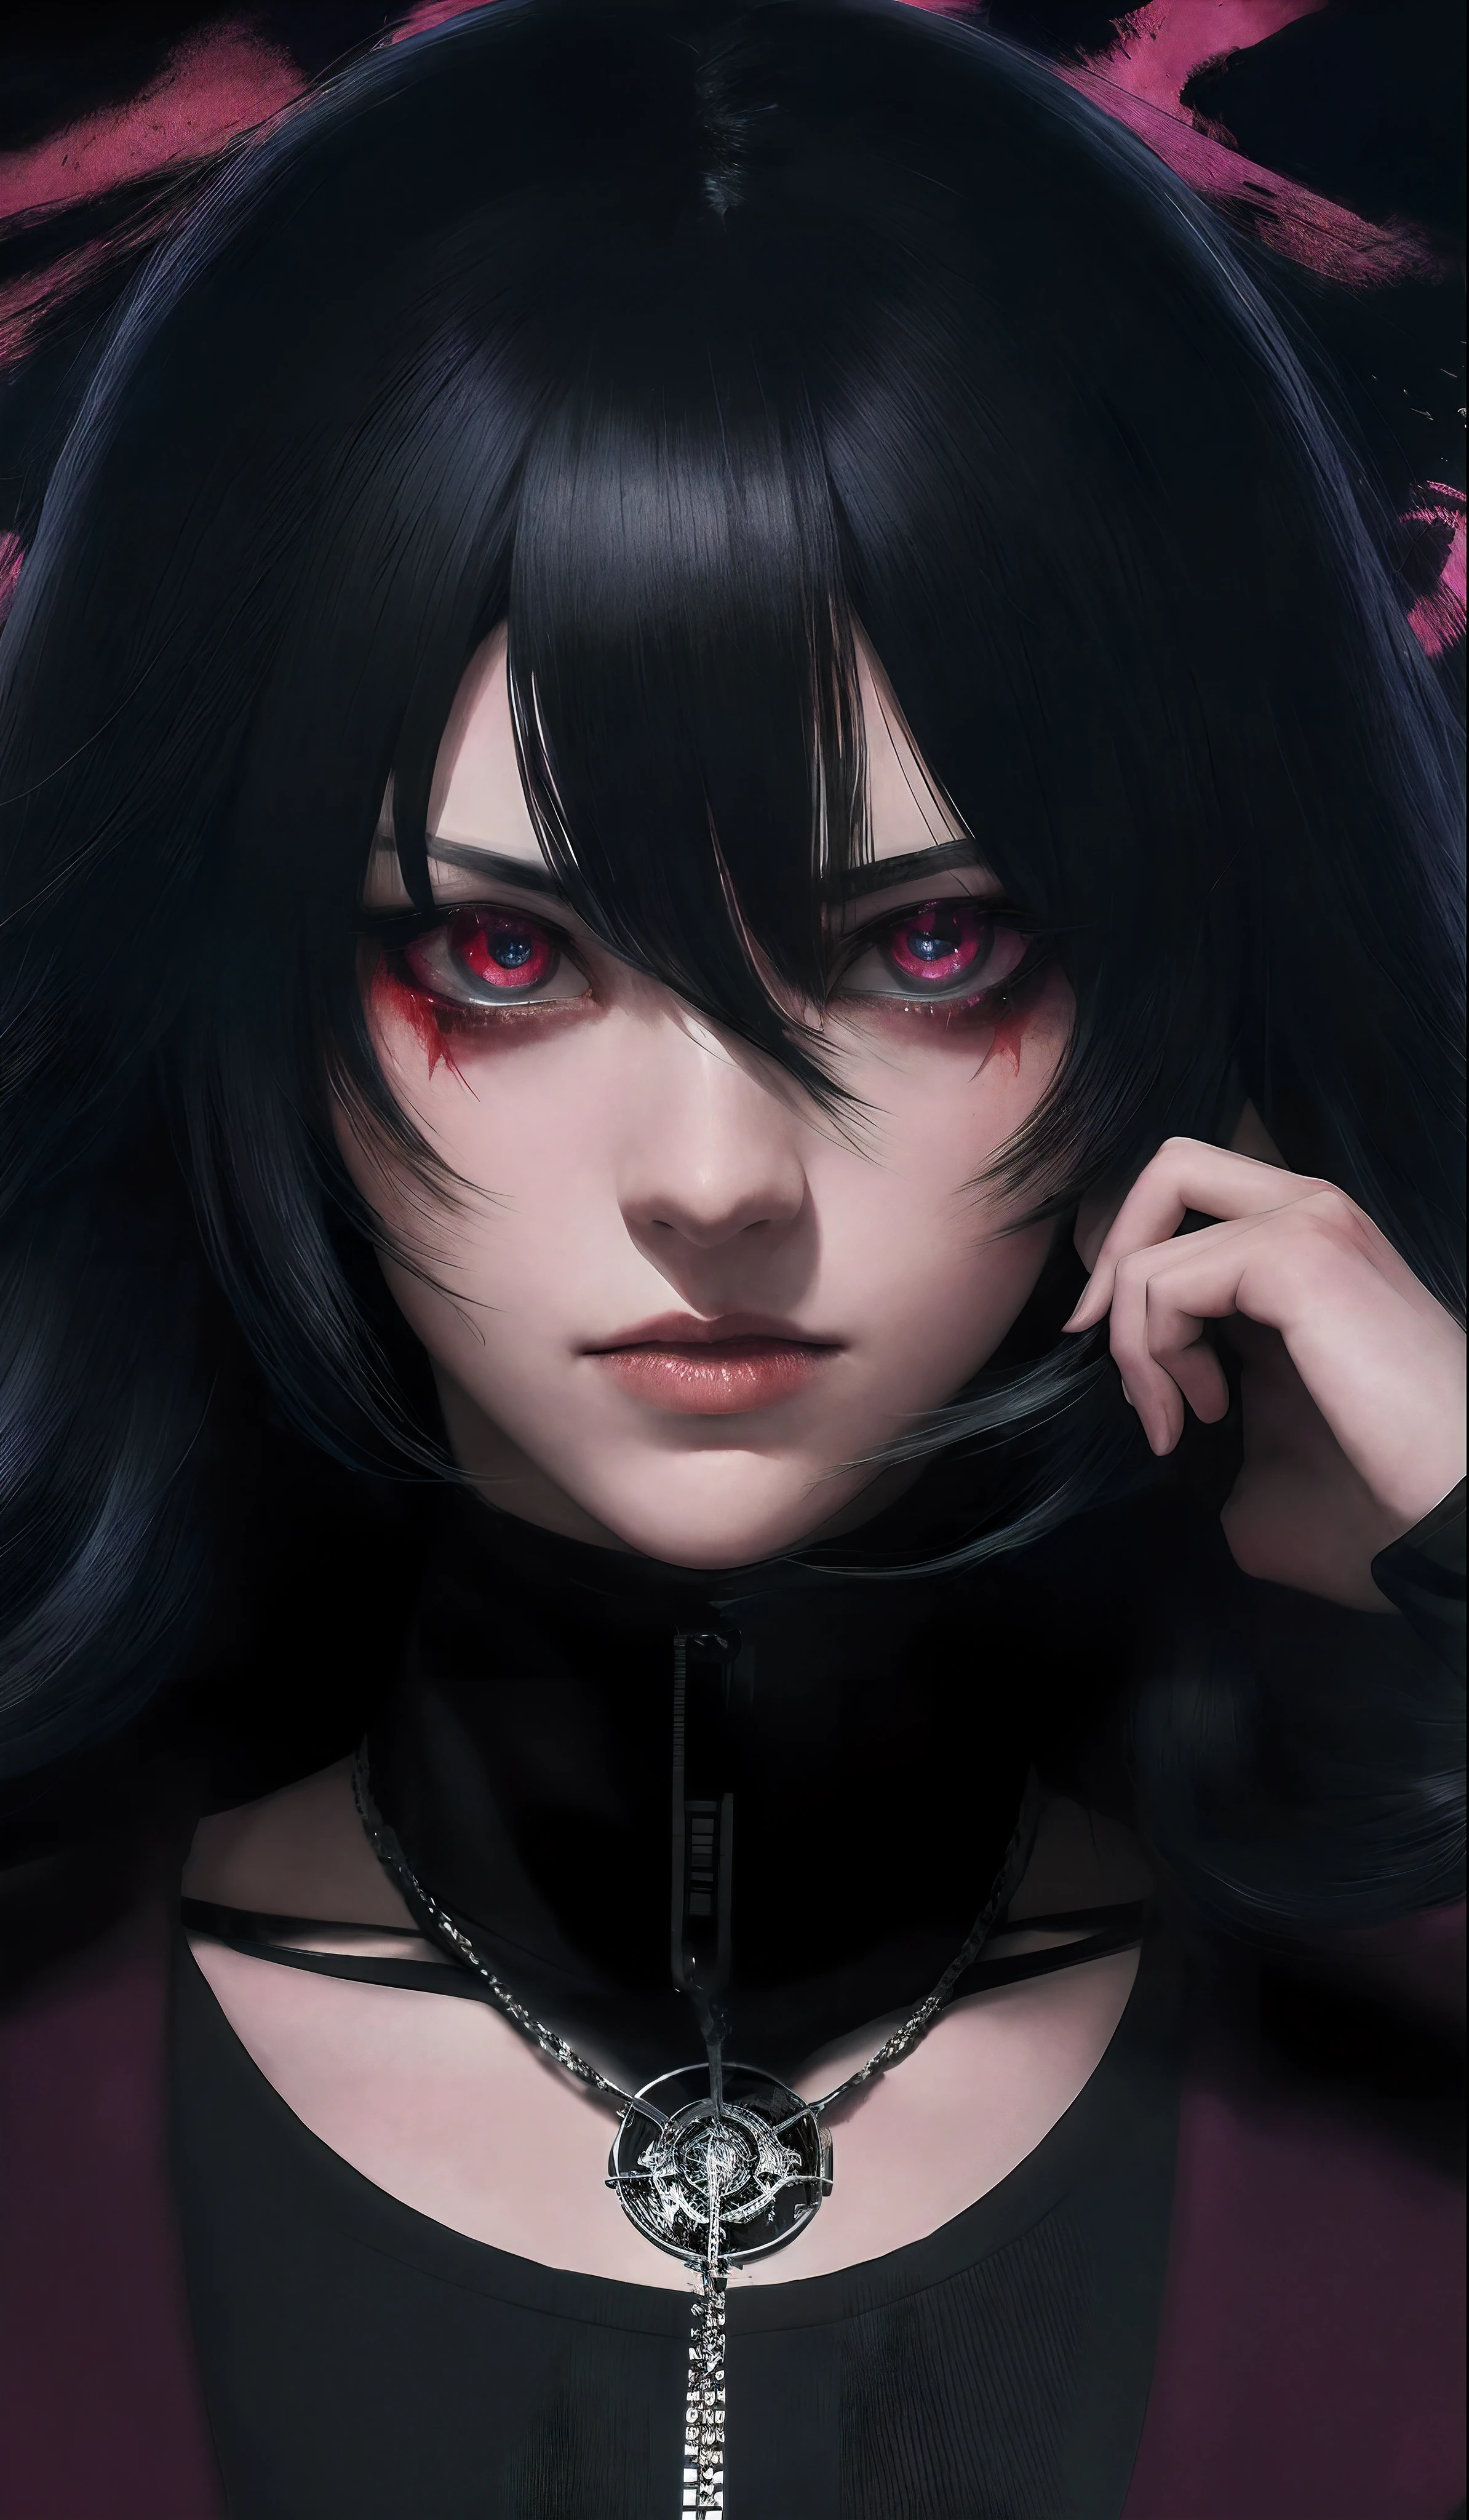 Anime character with blood dripping from eyes and black hair, 4K anime style, with glowing red eyes, anime wallpaper 4k, Gapmoe Yandere Grimdark, Portrait Gapmoe Yandere Grimdark, anime wallpapers 4k, Anime Wallpaper 4k, Anime Art Wallpaper 8K, Badass Anime 8K, Anime Art Wallpaper 4K, Anime Art Wallpaper 4K